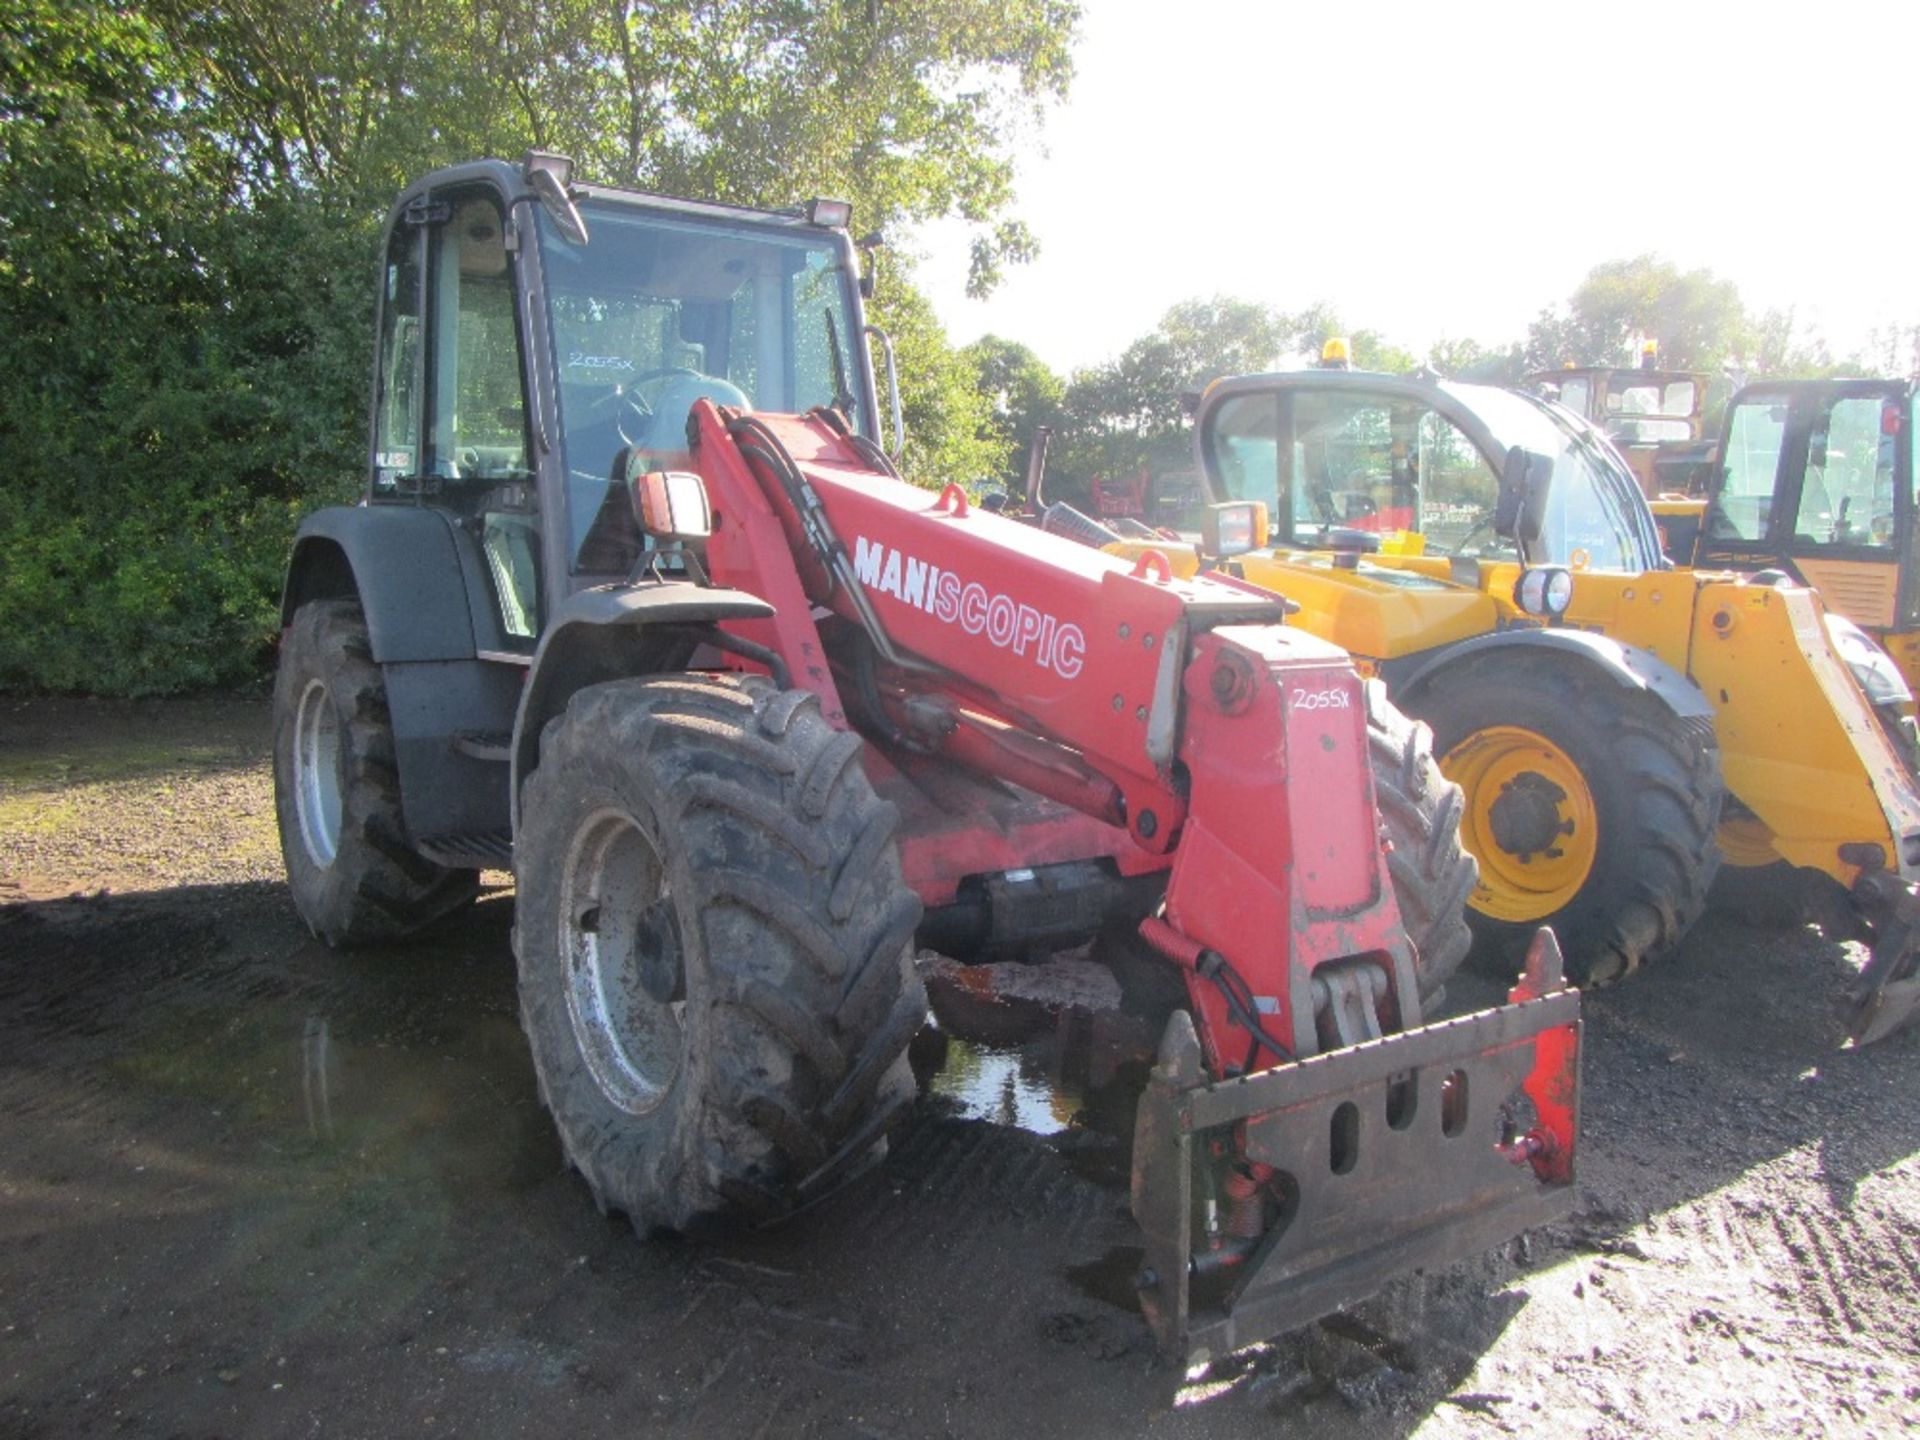 2005 Manitou MLA628 Maniscopic Pivot Steer Telehandler. Registration Documents will be supplied. - Image 2 of 5